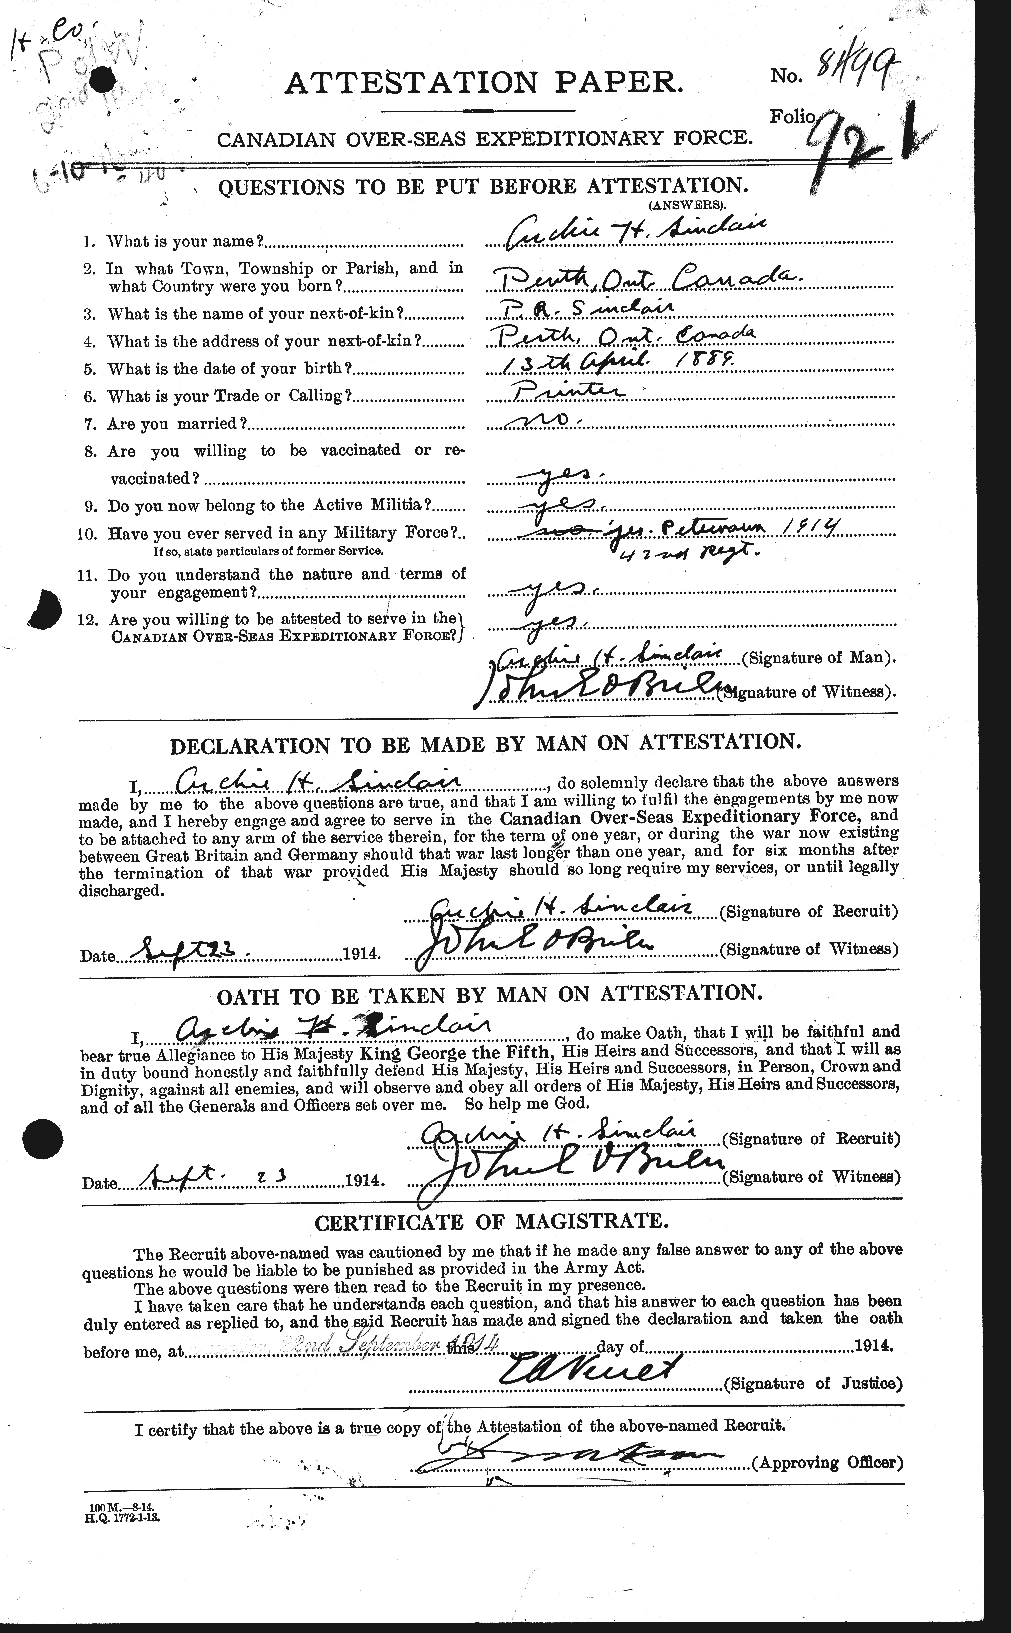 Personnel Records of the First World War - CEF 096661a